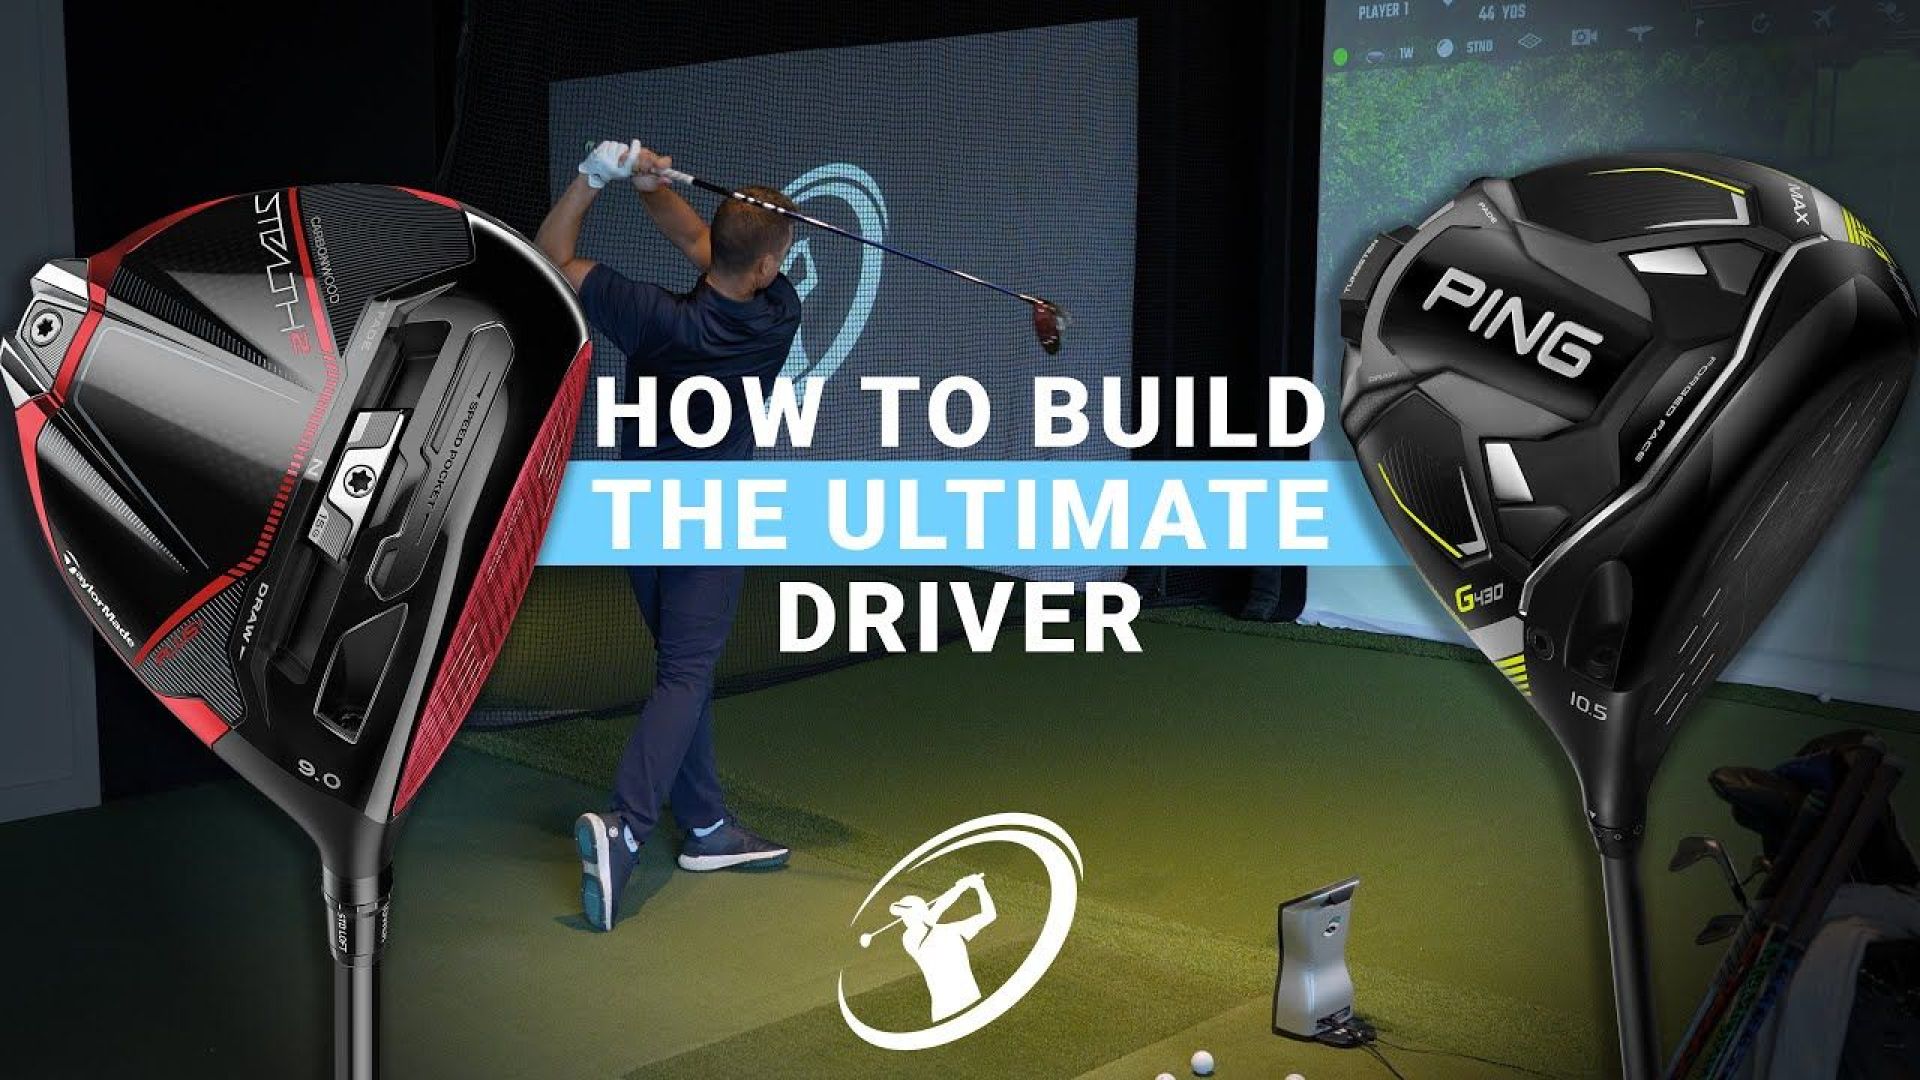 VIDEO: How to Build the Ultimate Driver